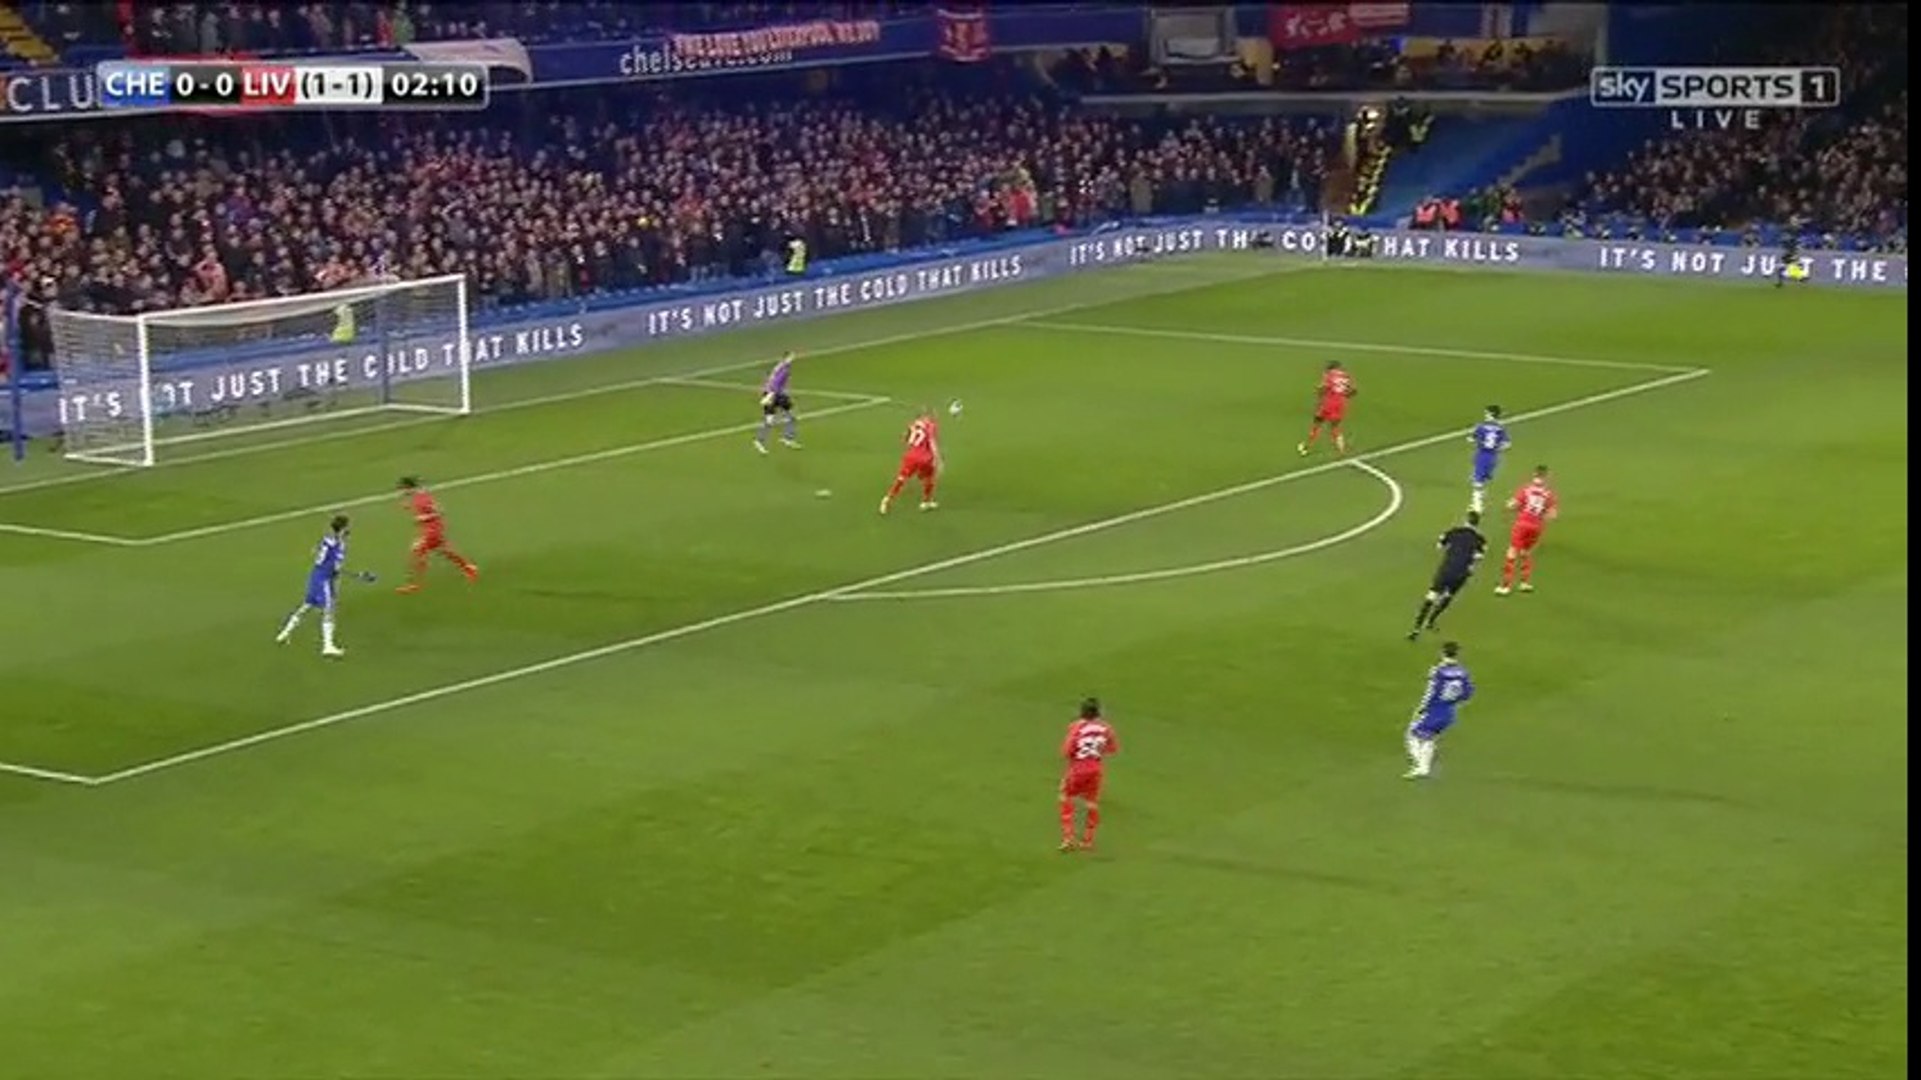 Chelsea vs Liverpool FULL MATCH Half 1/2 (English Commentary) 27/01/2015 -  Capital One Cup - video Dailymotion